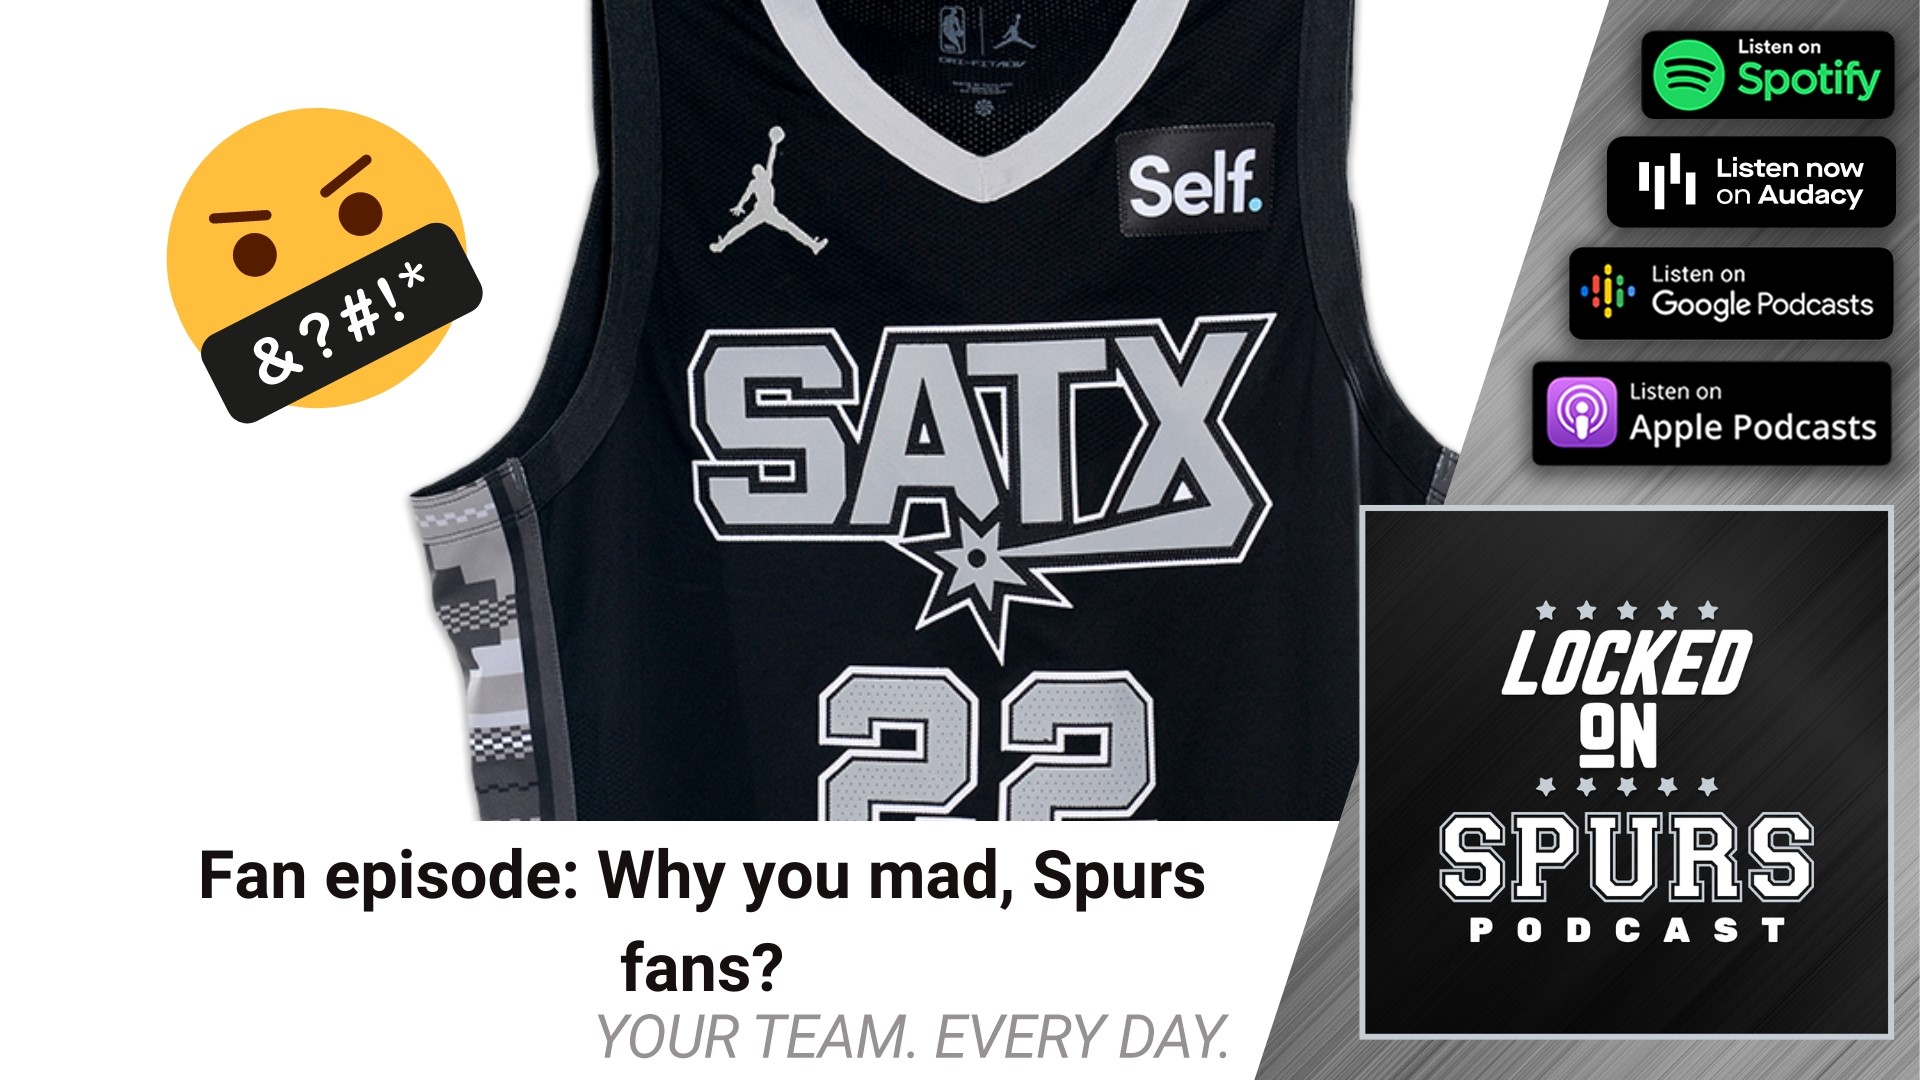 Spurs fans were not thrilled about the new jerseys.